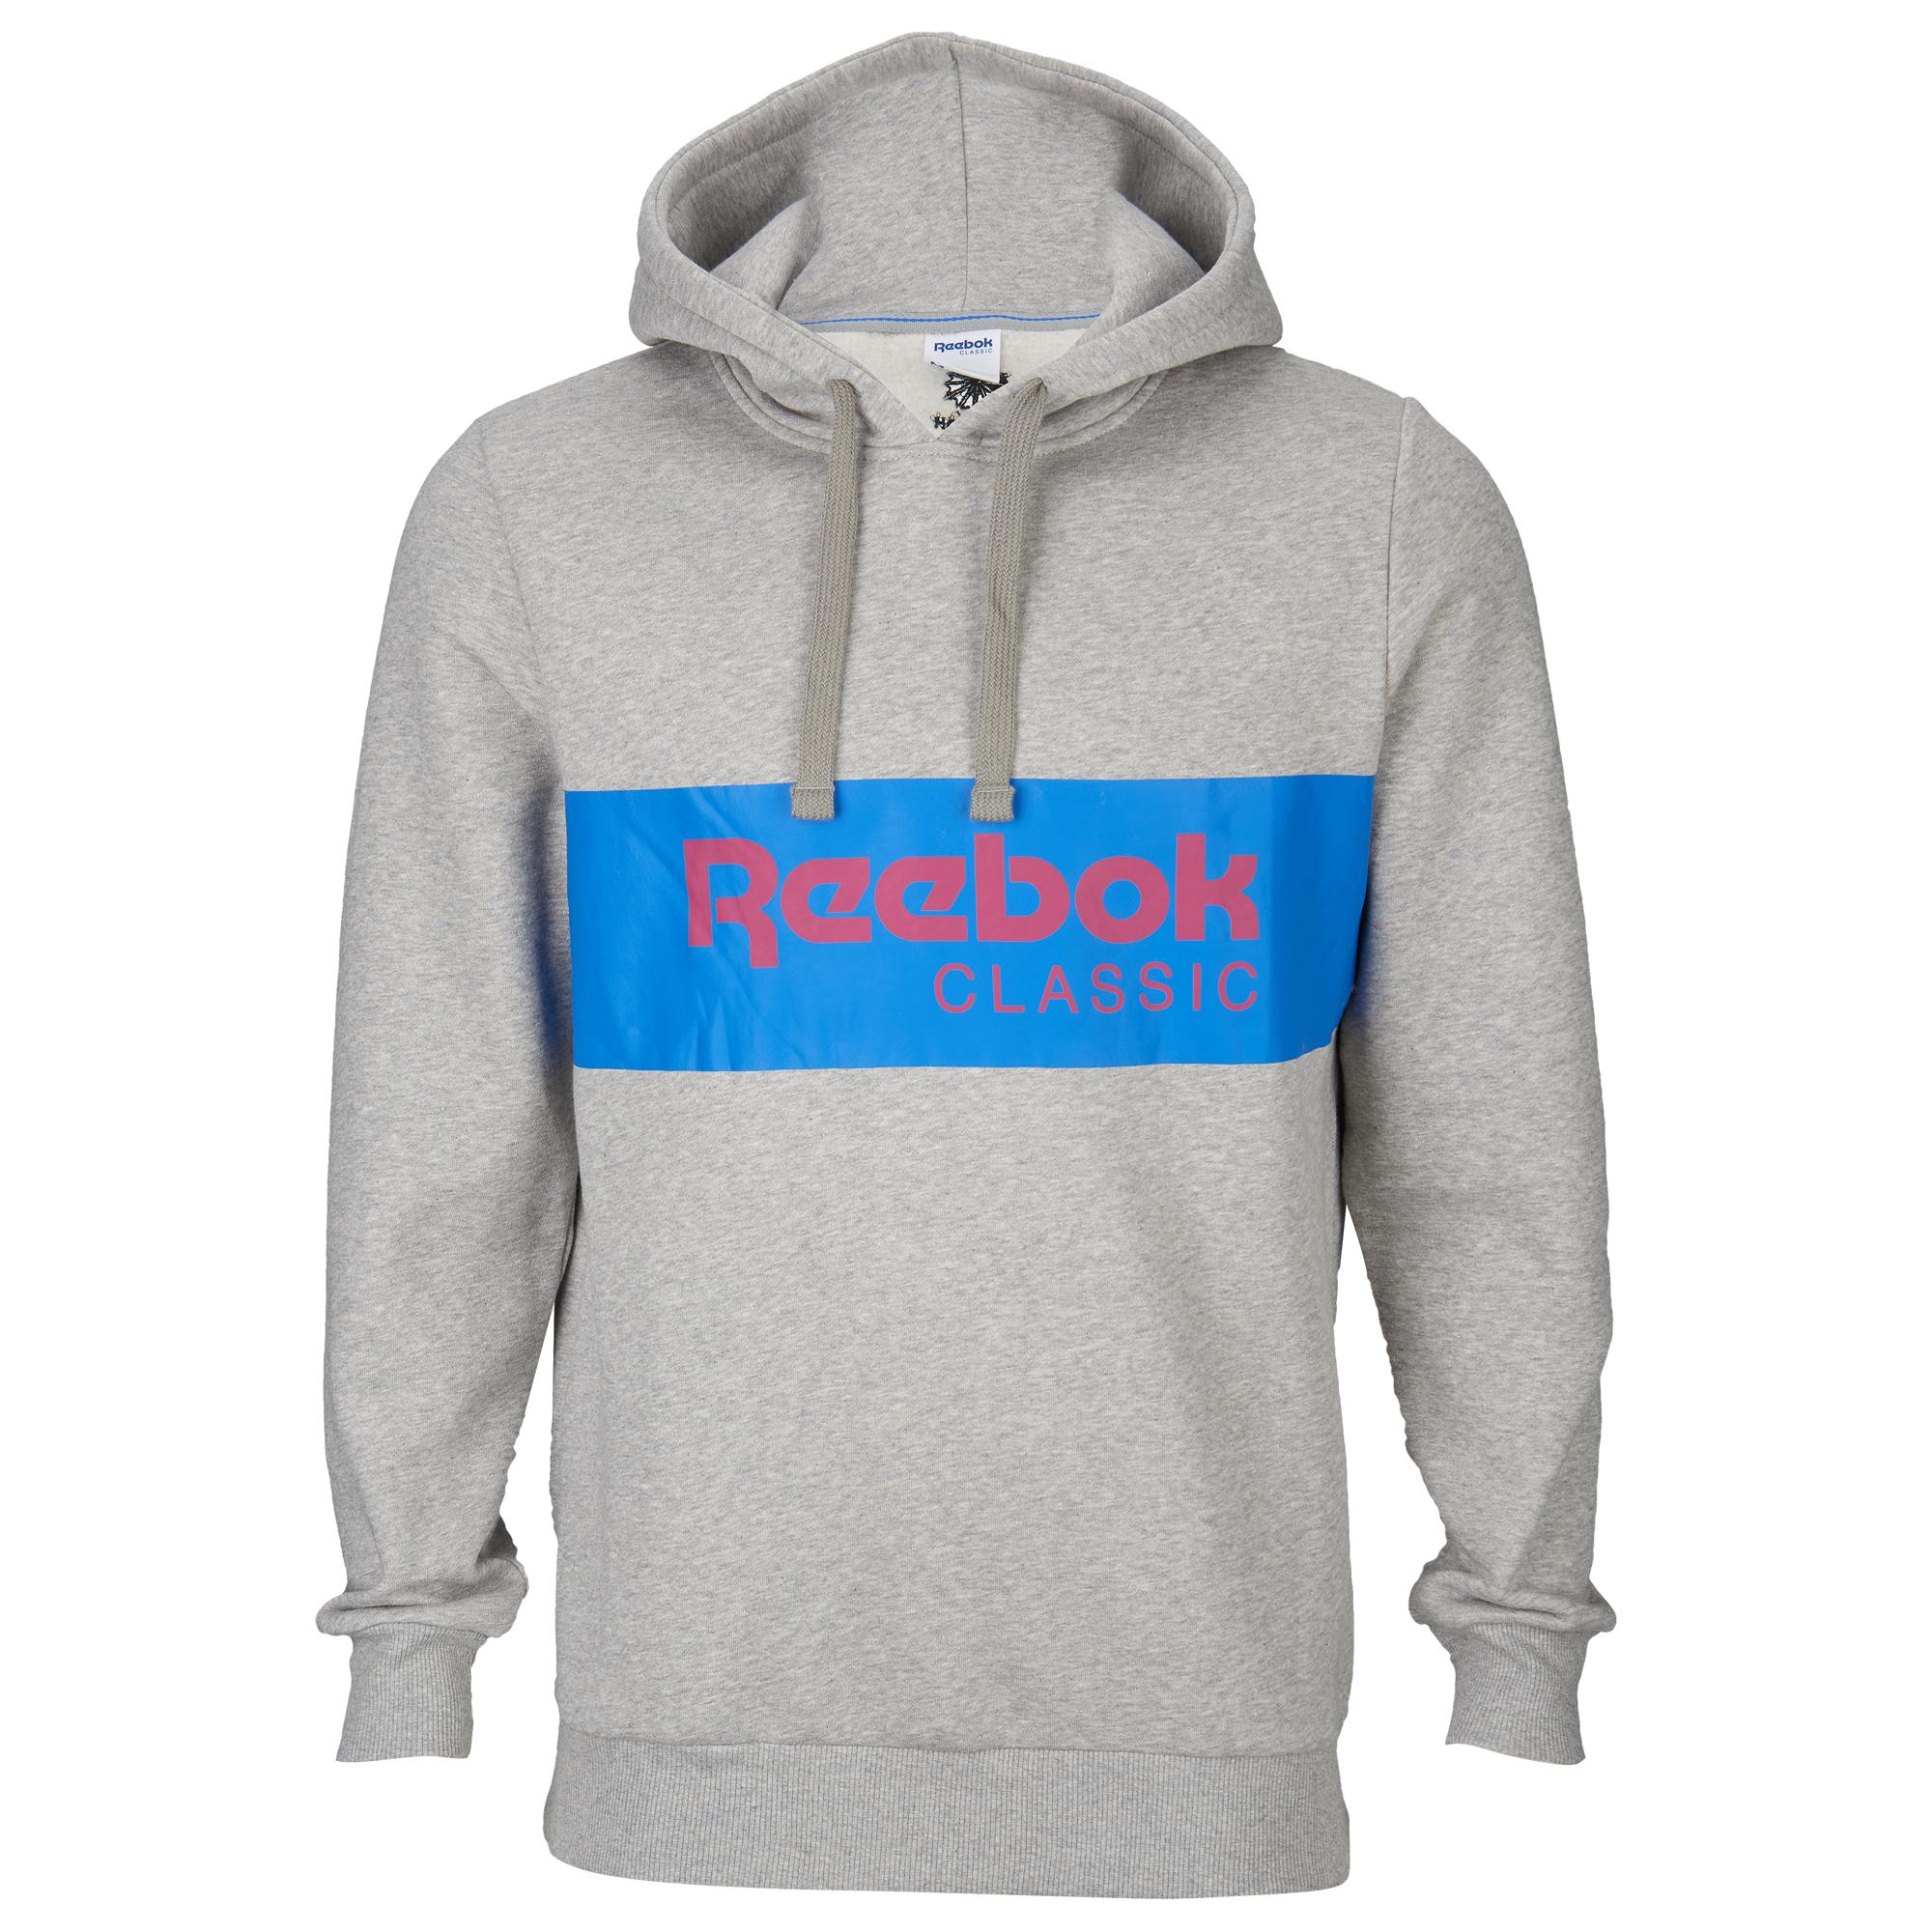 Reebok Classic Pullover Hoodie in Gray for Men - Lyst